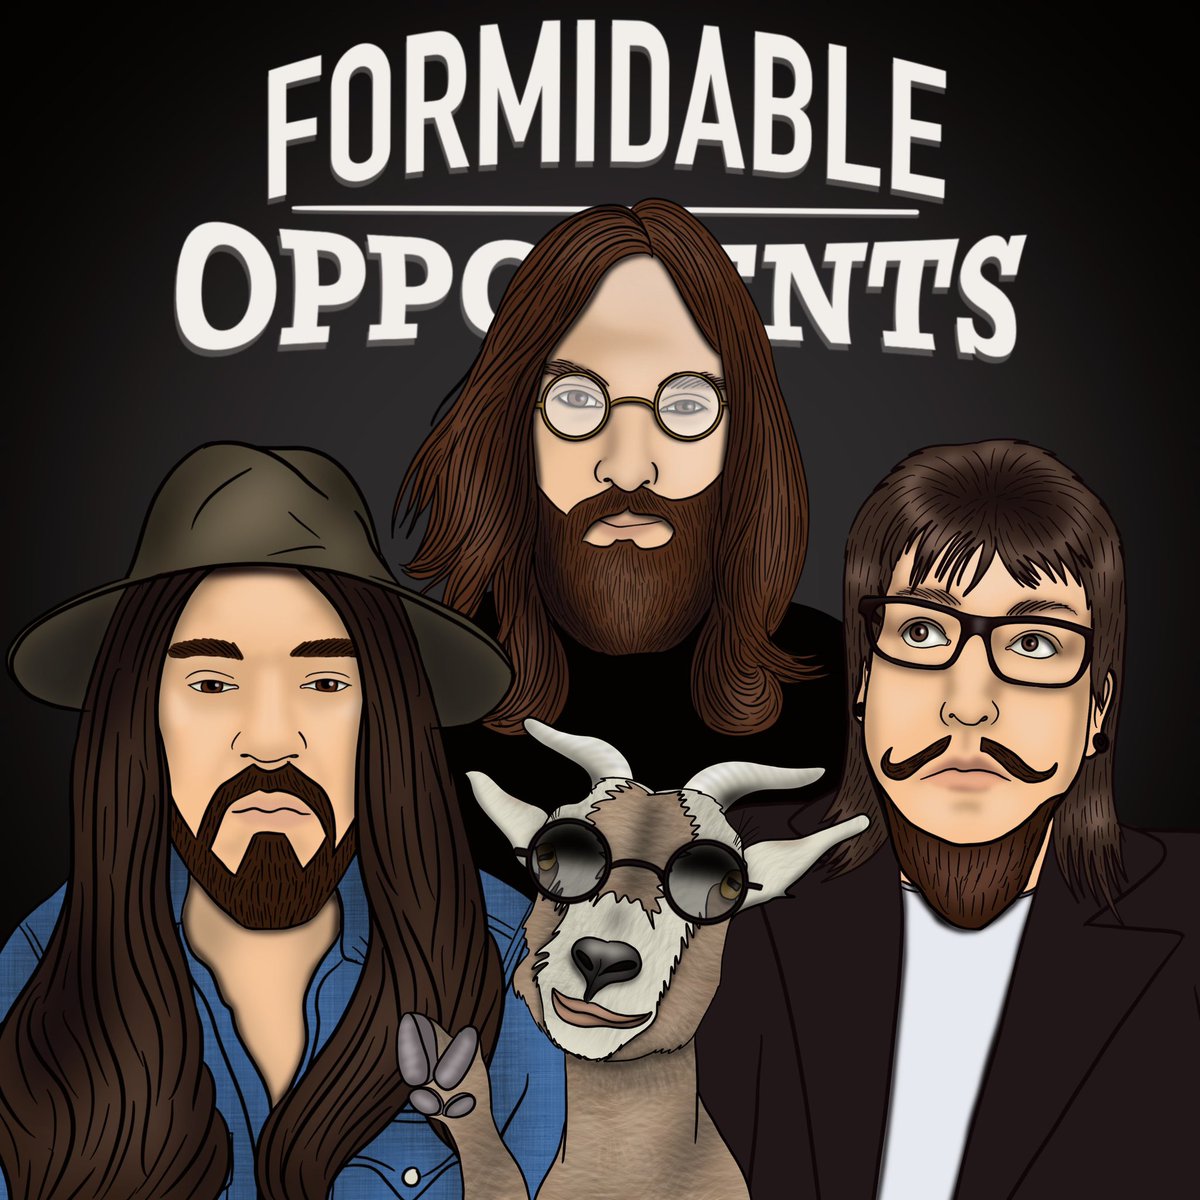 New Episode Up!  “Best Beatles Solo Song”

#podcast #podcasting #podcastersofinstagram #thebeatles #beatles #beatlemania #johnlennon #paulmccartney #georgeharrison #ringostarr #music #nostalgia #popculture #throwback #discussion #comedy #formidableopponents #Spotify #Apple